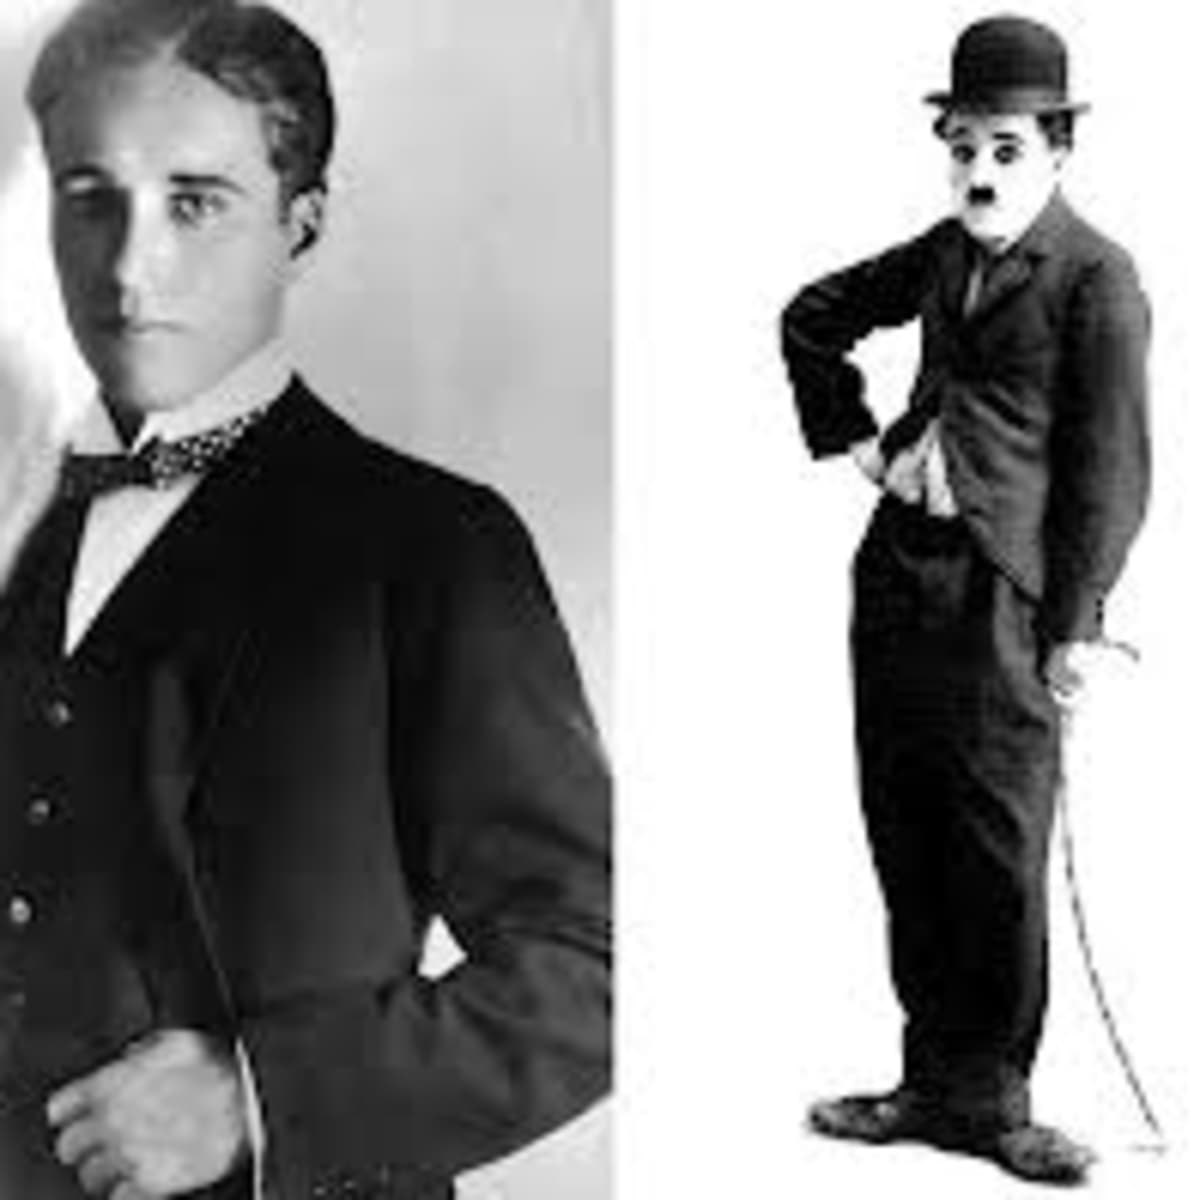 Interview with Charlie Chaplin - HubPages